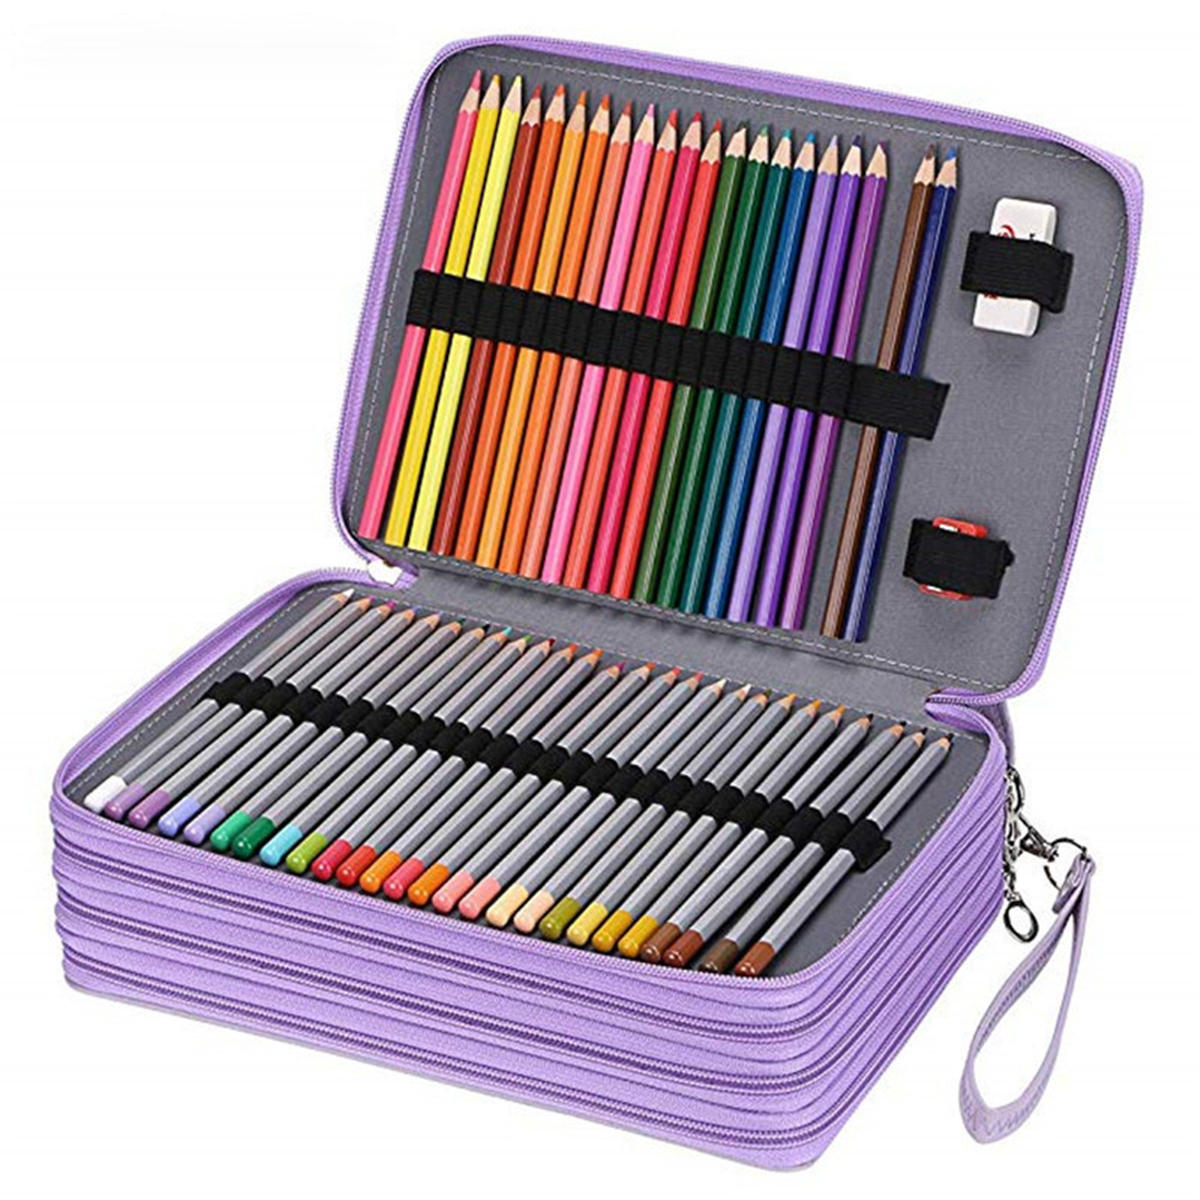 

184 Slots Colored Pencil Case Large Capacity Soft and PU Leather Pencil Holder Organizer with Carrying Handle Not Includ